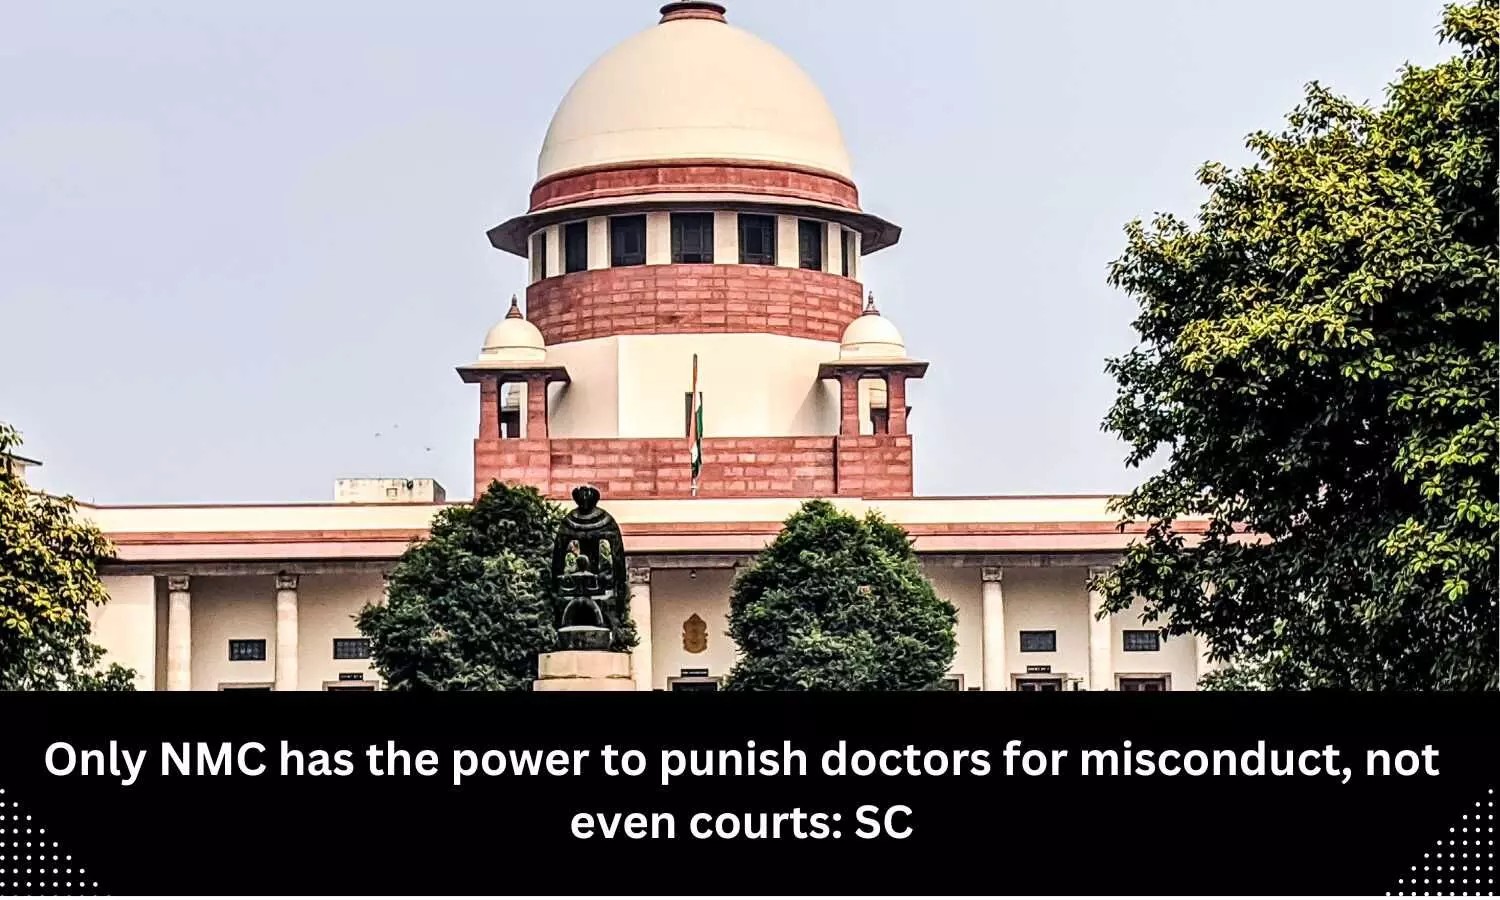 Only NMC has power to punish doctors for misconduct, not even courts: SC